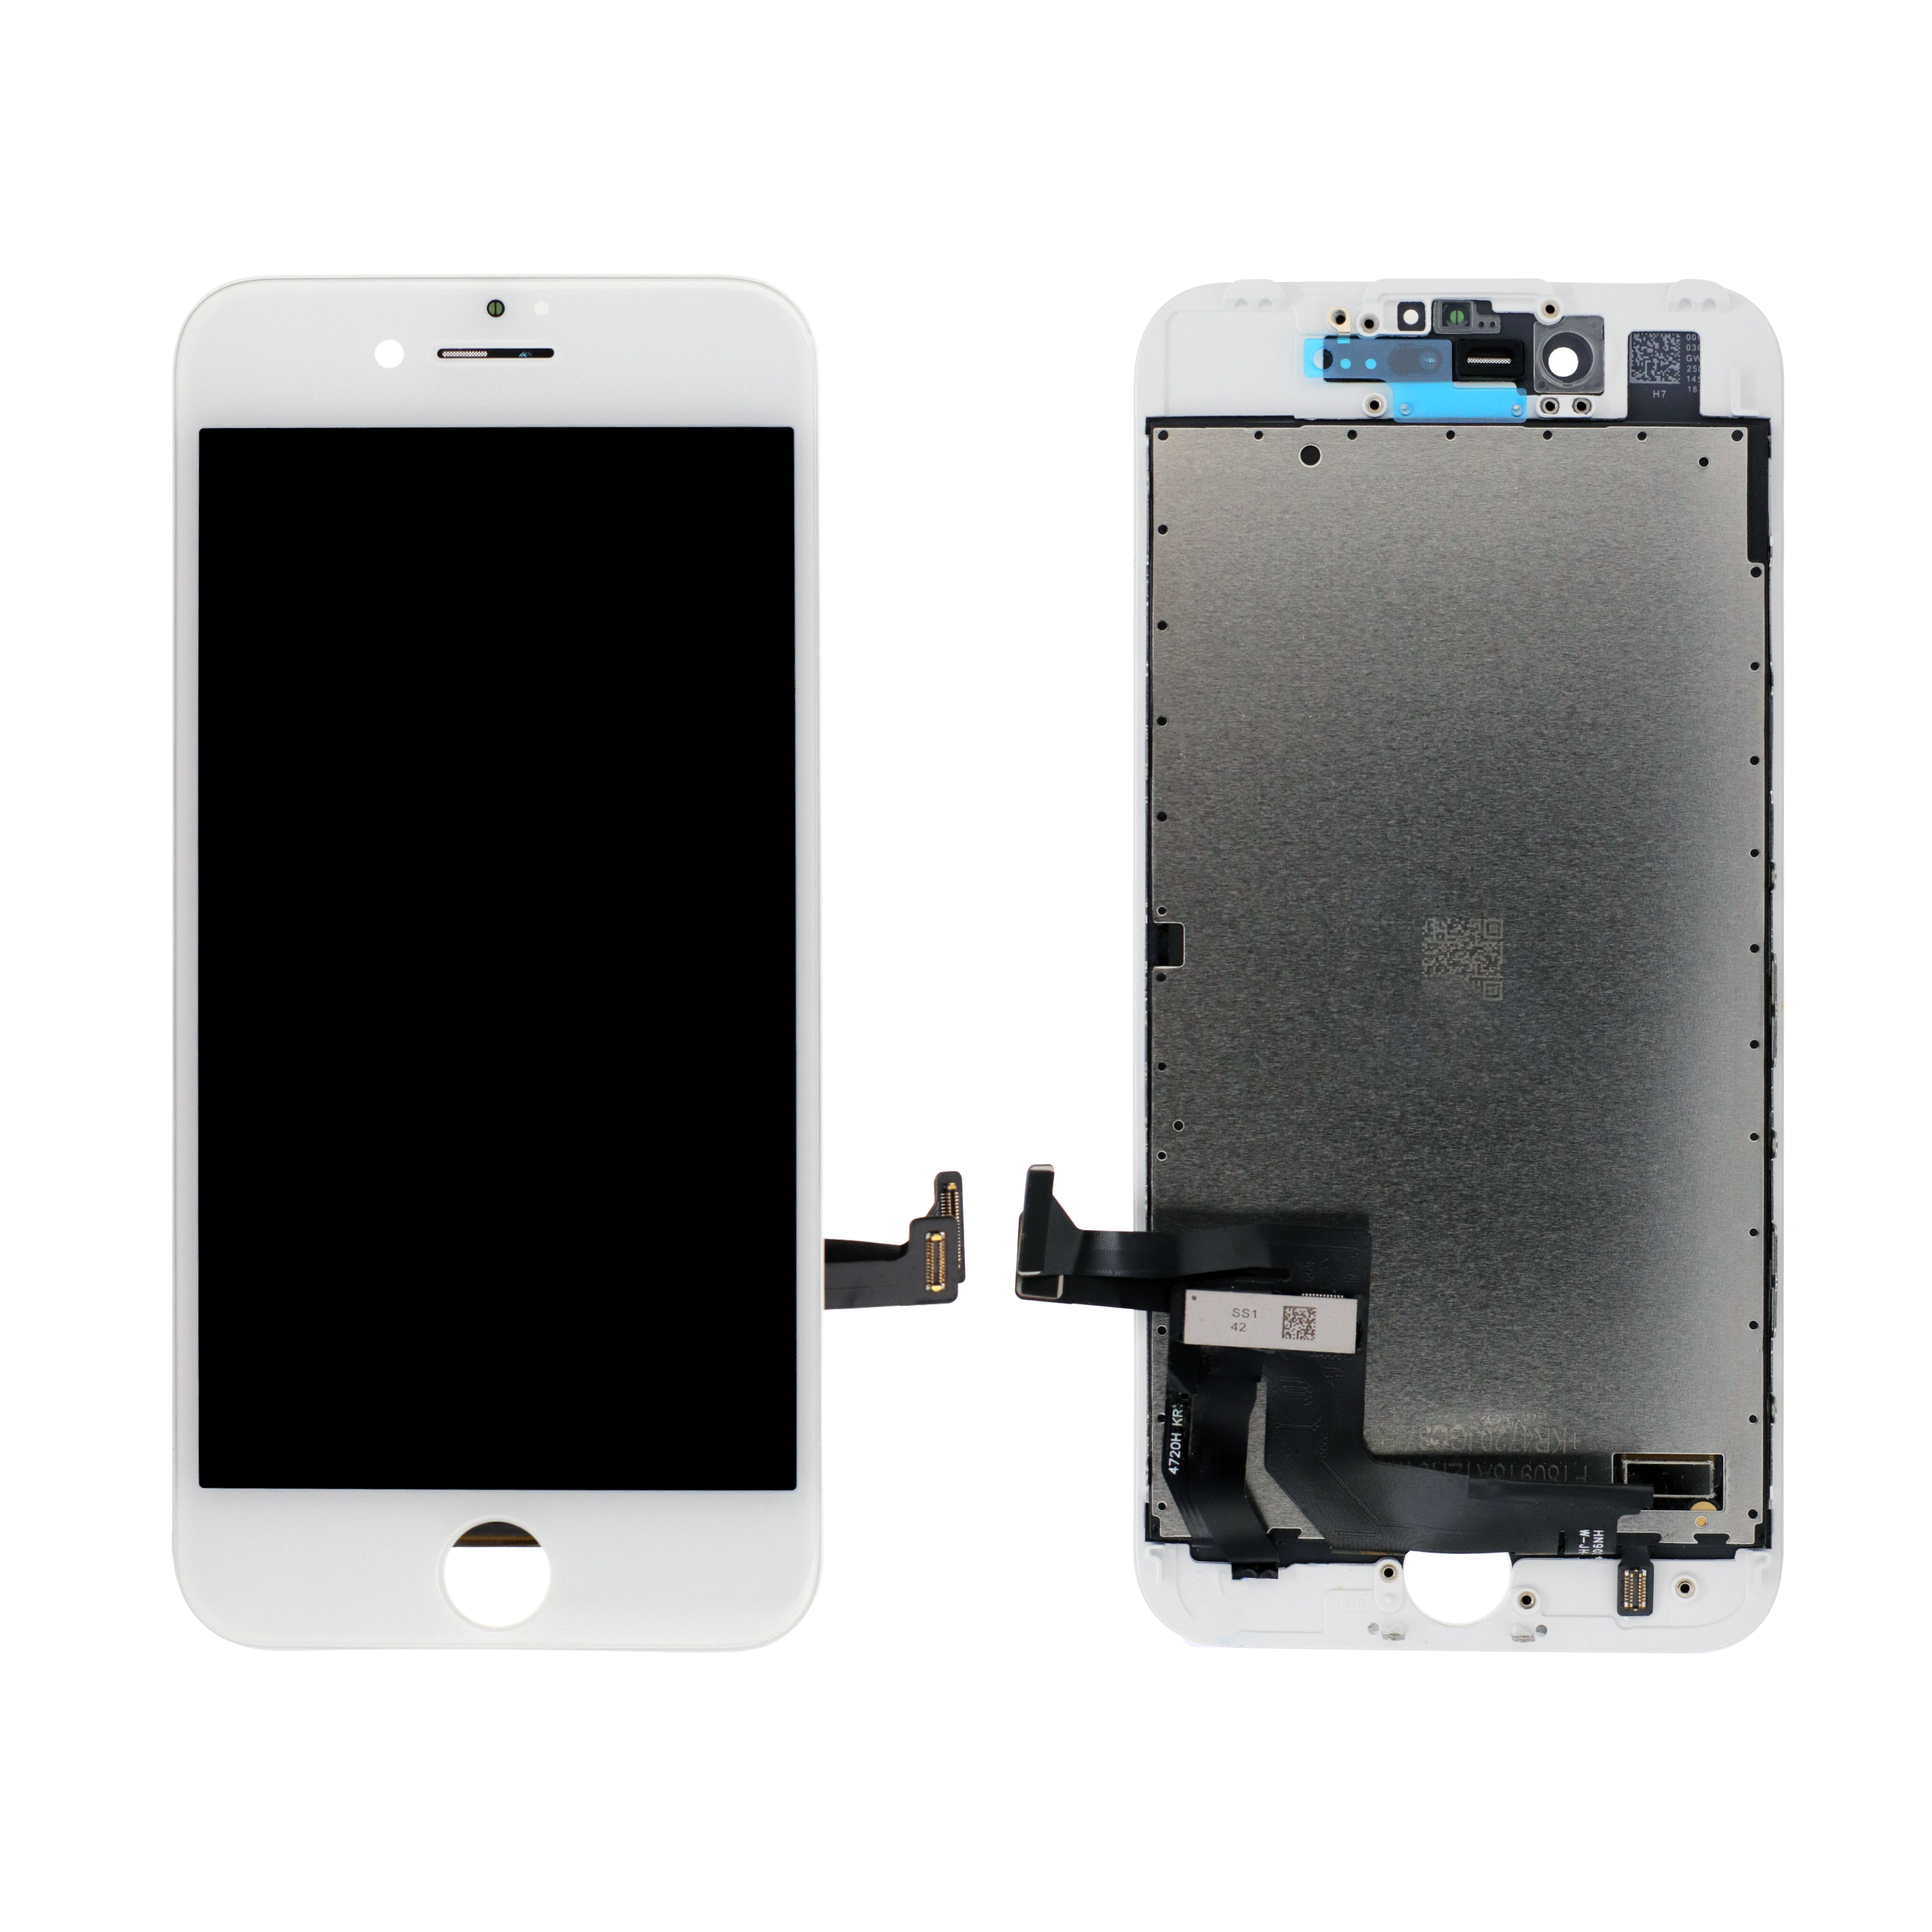 Premium LCD Assembly for use with iPhone 7 (White)